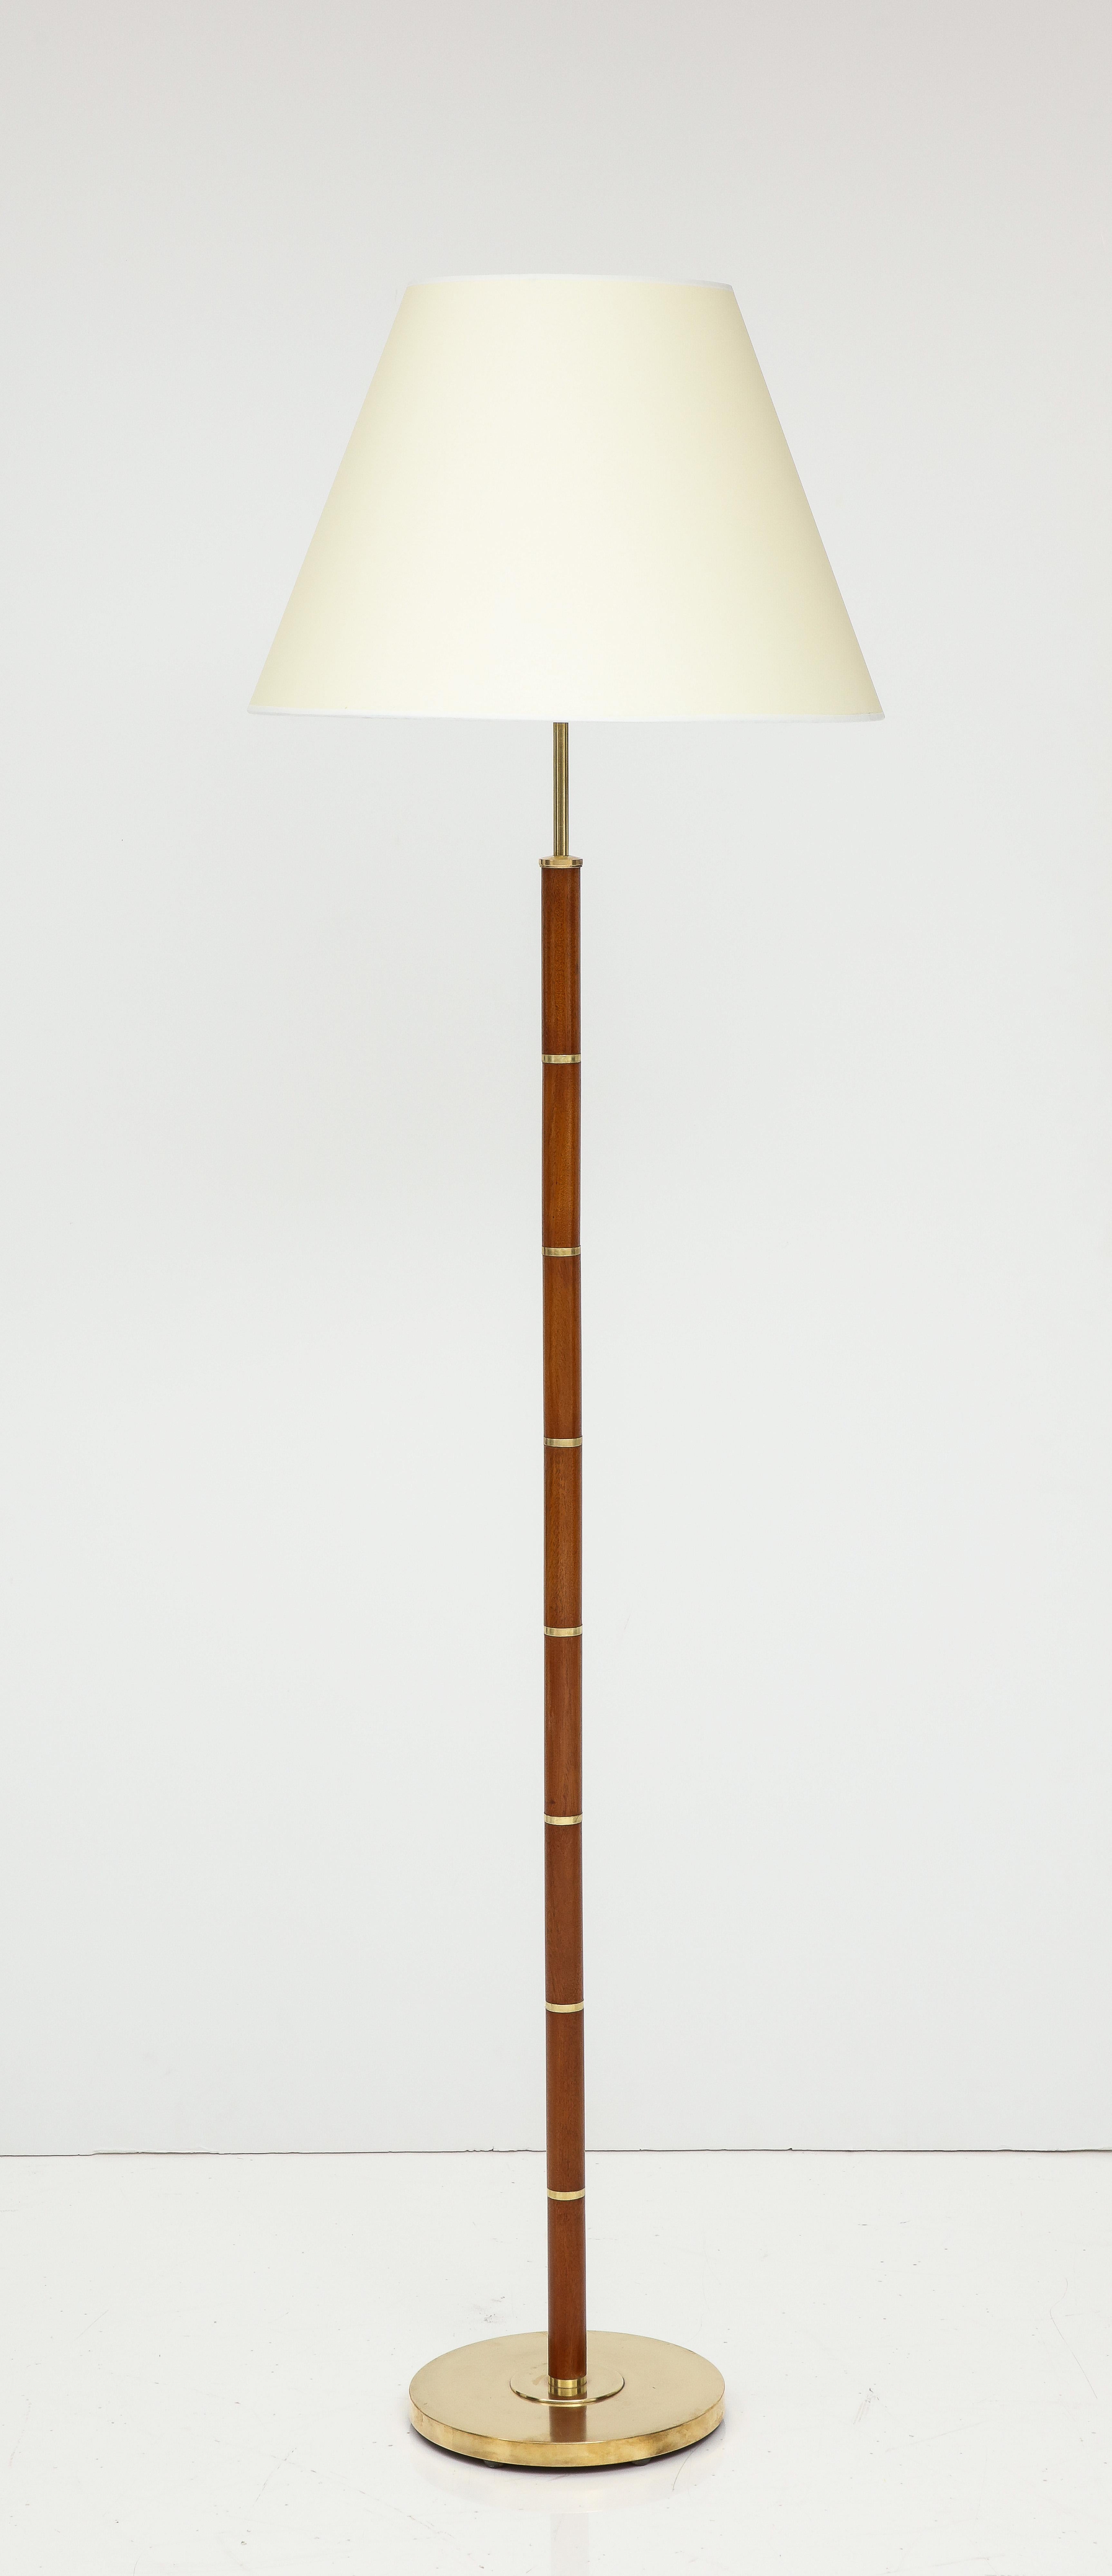 A Danish floor lamp, teak with brass bandings and a circular brass base, Circa 1960s. Attributed Fog & Mørup. Re-wired for US. New shade.
Measures: 70 in. high - to top of current shade 10.5 in. diameter. base.